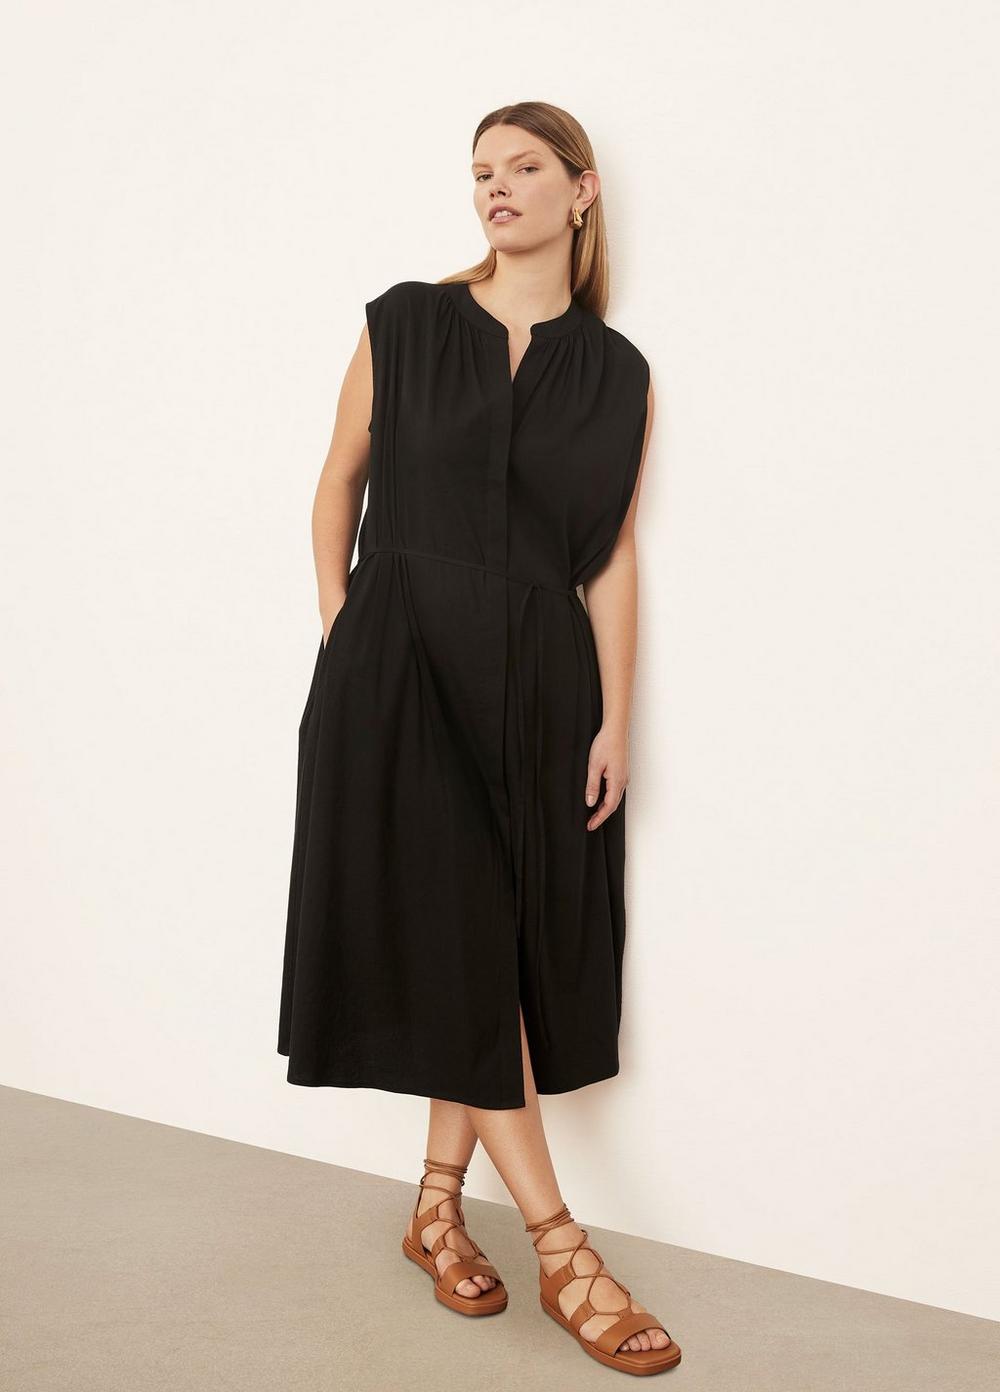 Sleeveless Shirred Band Collar Dress in Dresses | Vince